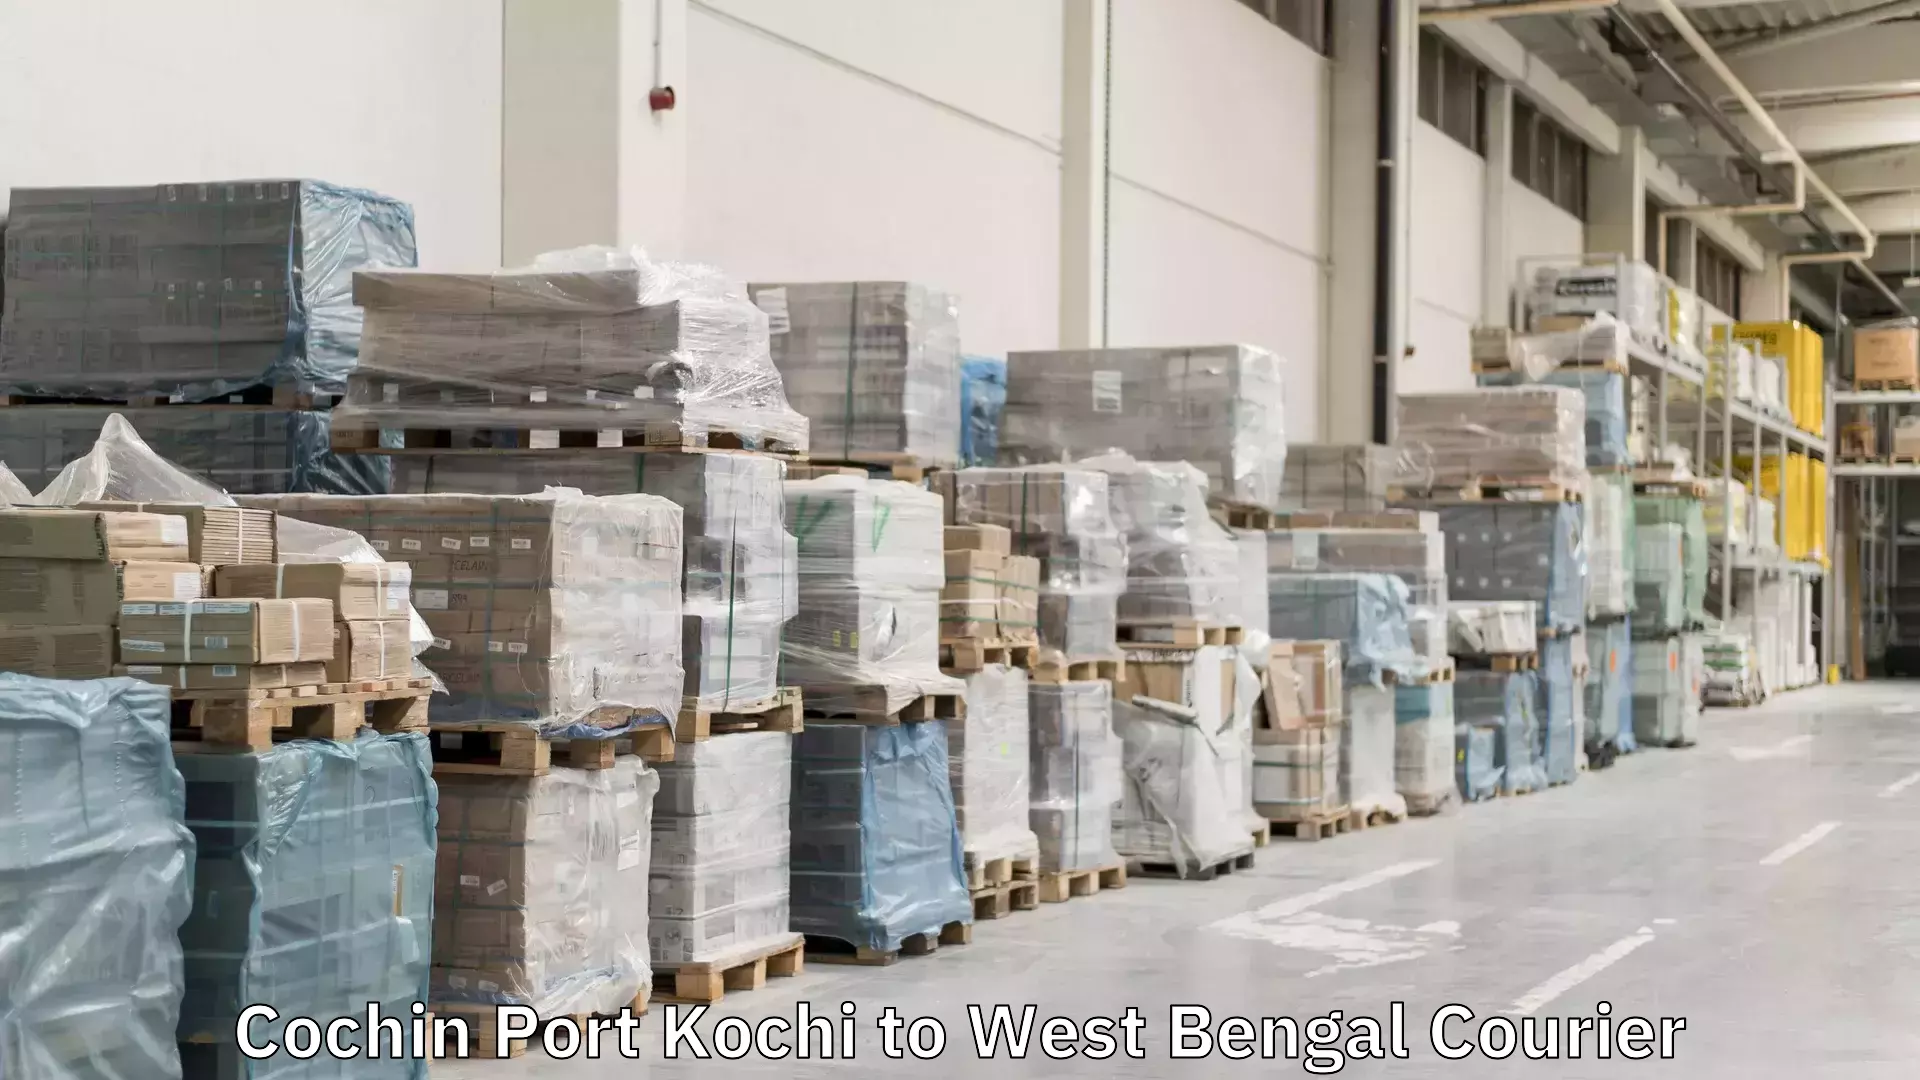 Pharmaceutical courier Cochin Port Kochi to West Bengal